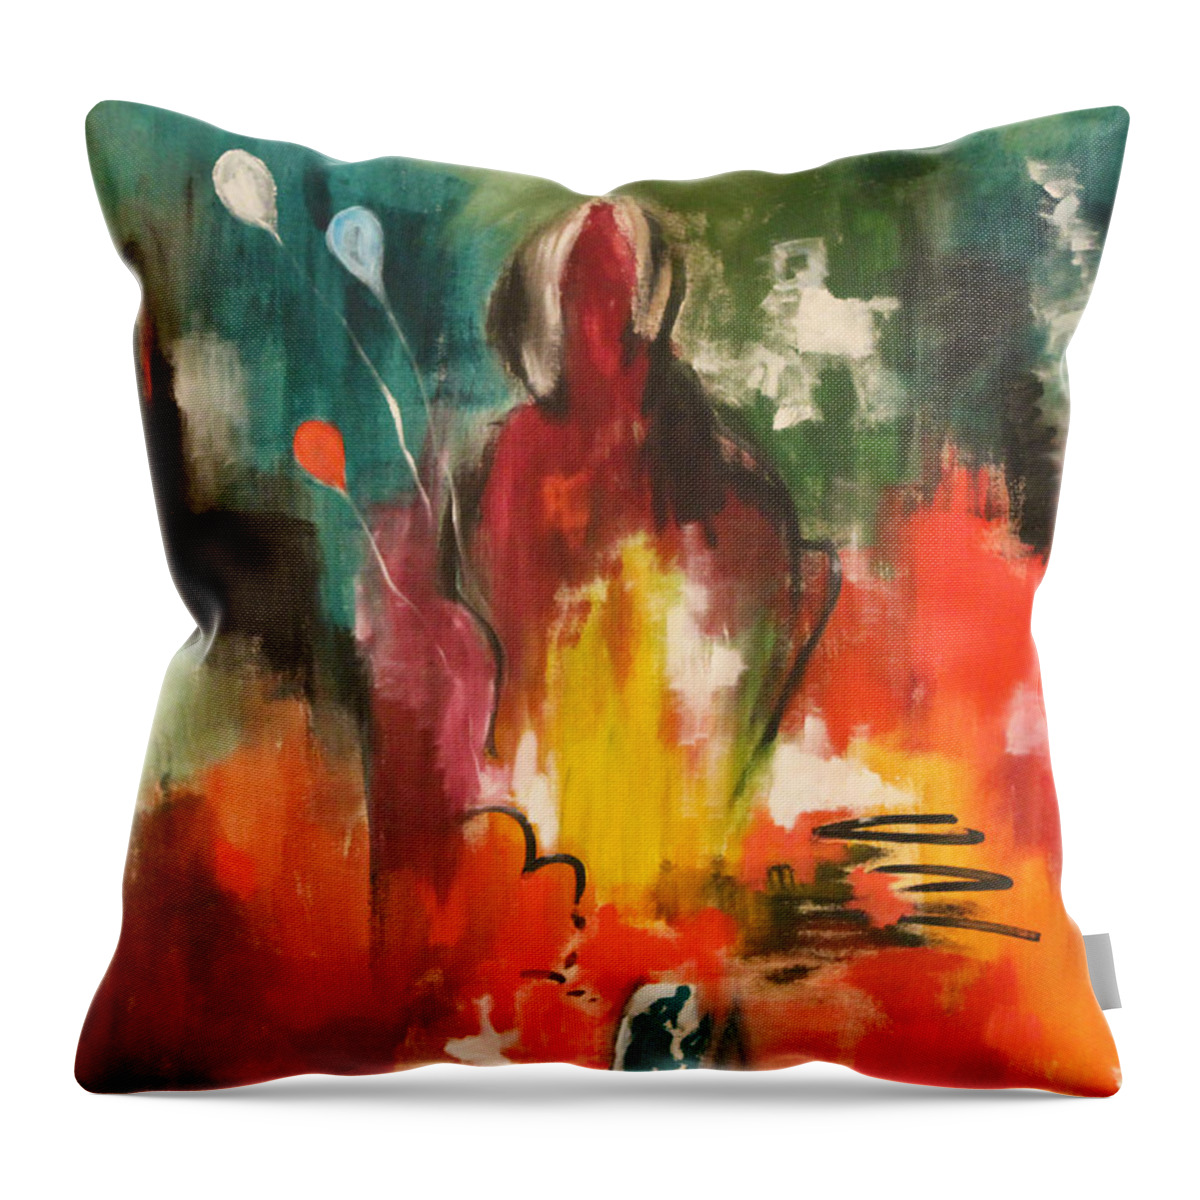 2010 Throw Pillow featuring the painting Getting Over by Will Felix